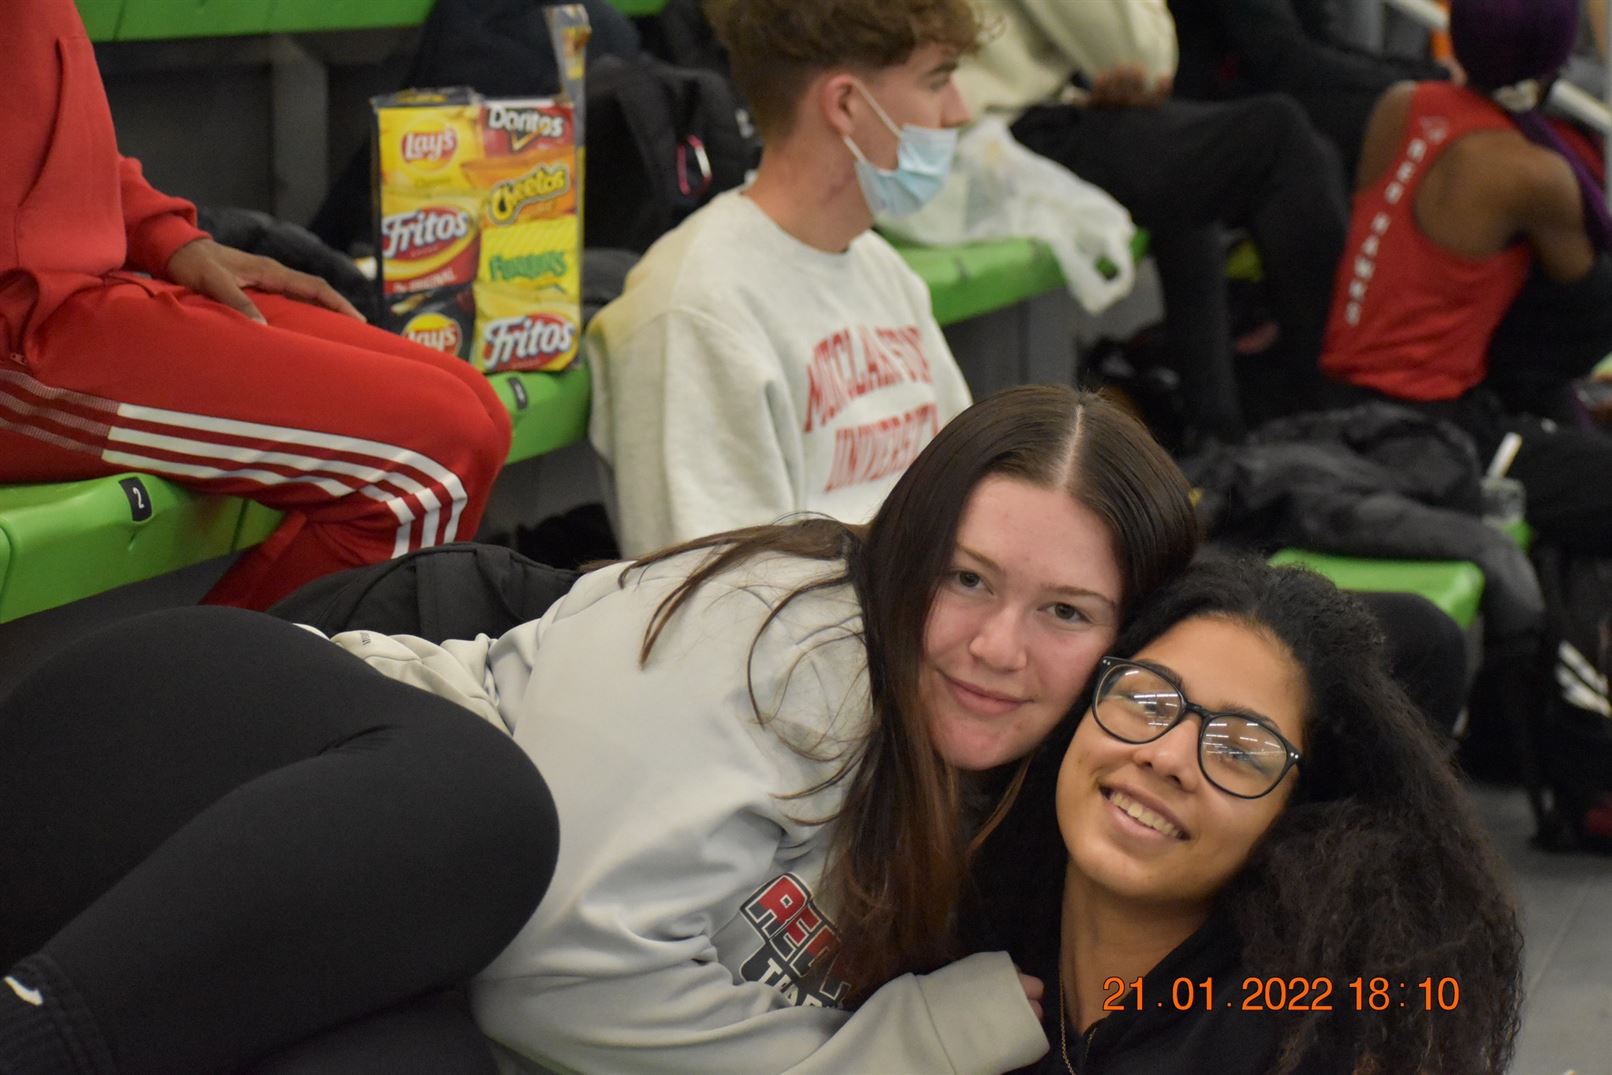 Tara Mastroianni and Eve Rosado has created a strong friendship with each other on and off the track. Photo courtesy of Tara Mastroianni